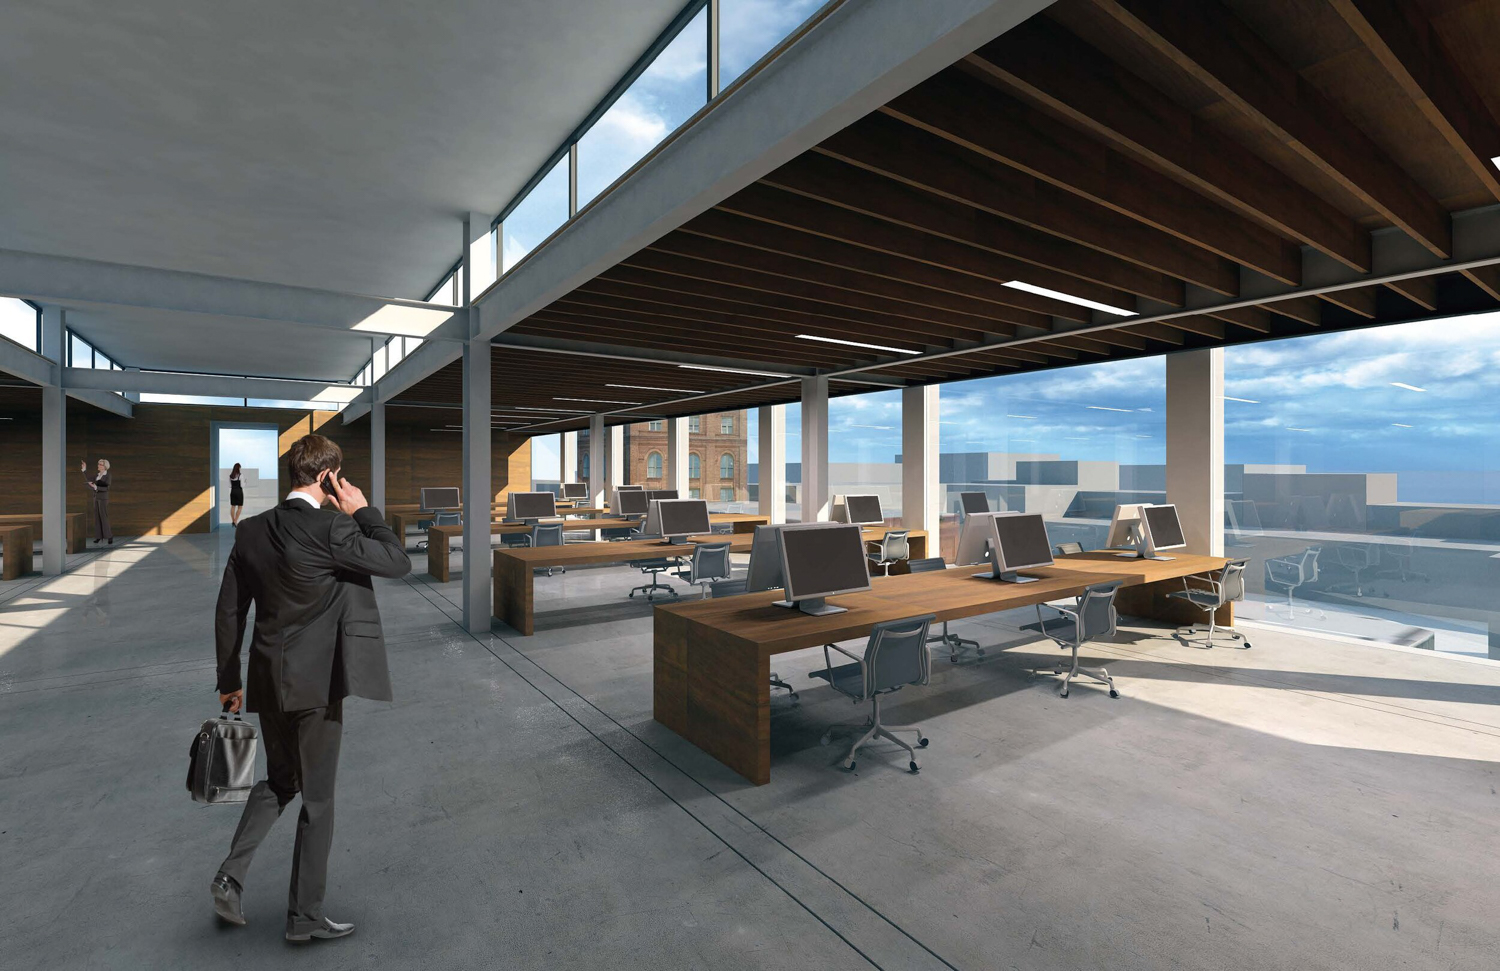 340 11th Street fourth floor view with clerestory windows mid-ceiling, rendering by Stanley Saitowitz Natoma Architects